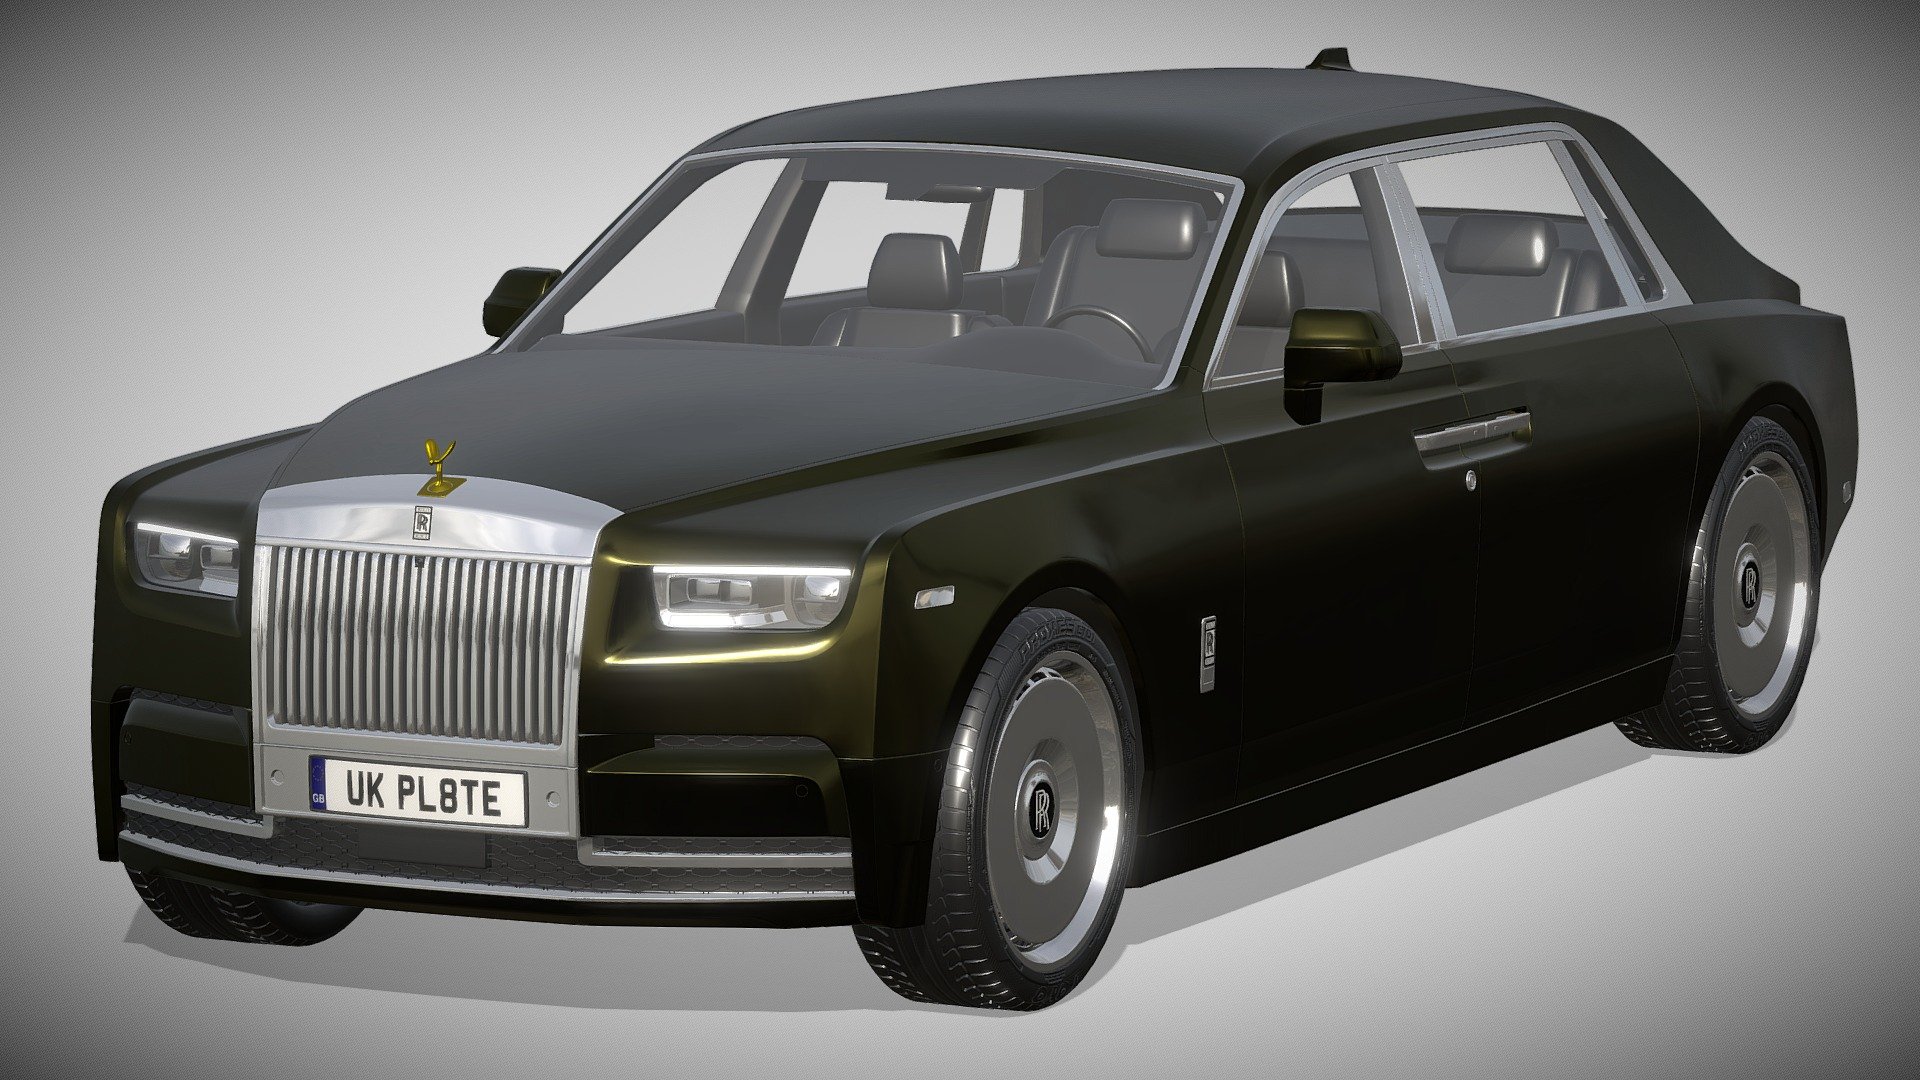 Rolls-Royce Phantom Extended Series II 2022

https://www.rolls-roycemotorcars.com/en_GB/showroom/phantom-extended.html

Clean geometry Light weight model, yet completely detailed for HI-Res renders. Use for movies, Advertisements or games

Corona render and materials

All textures include in *.rar files

Lighting setup is not included in the file! - Rolls-Royce Phantom Extended Series II 2022 - Buy Royalty Free 3D model by zifir3d 3d model